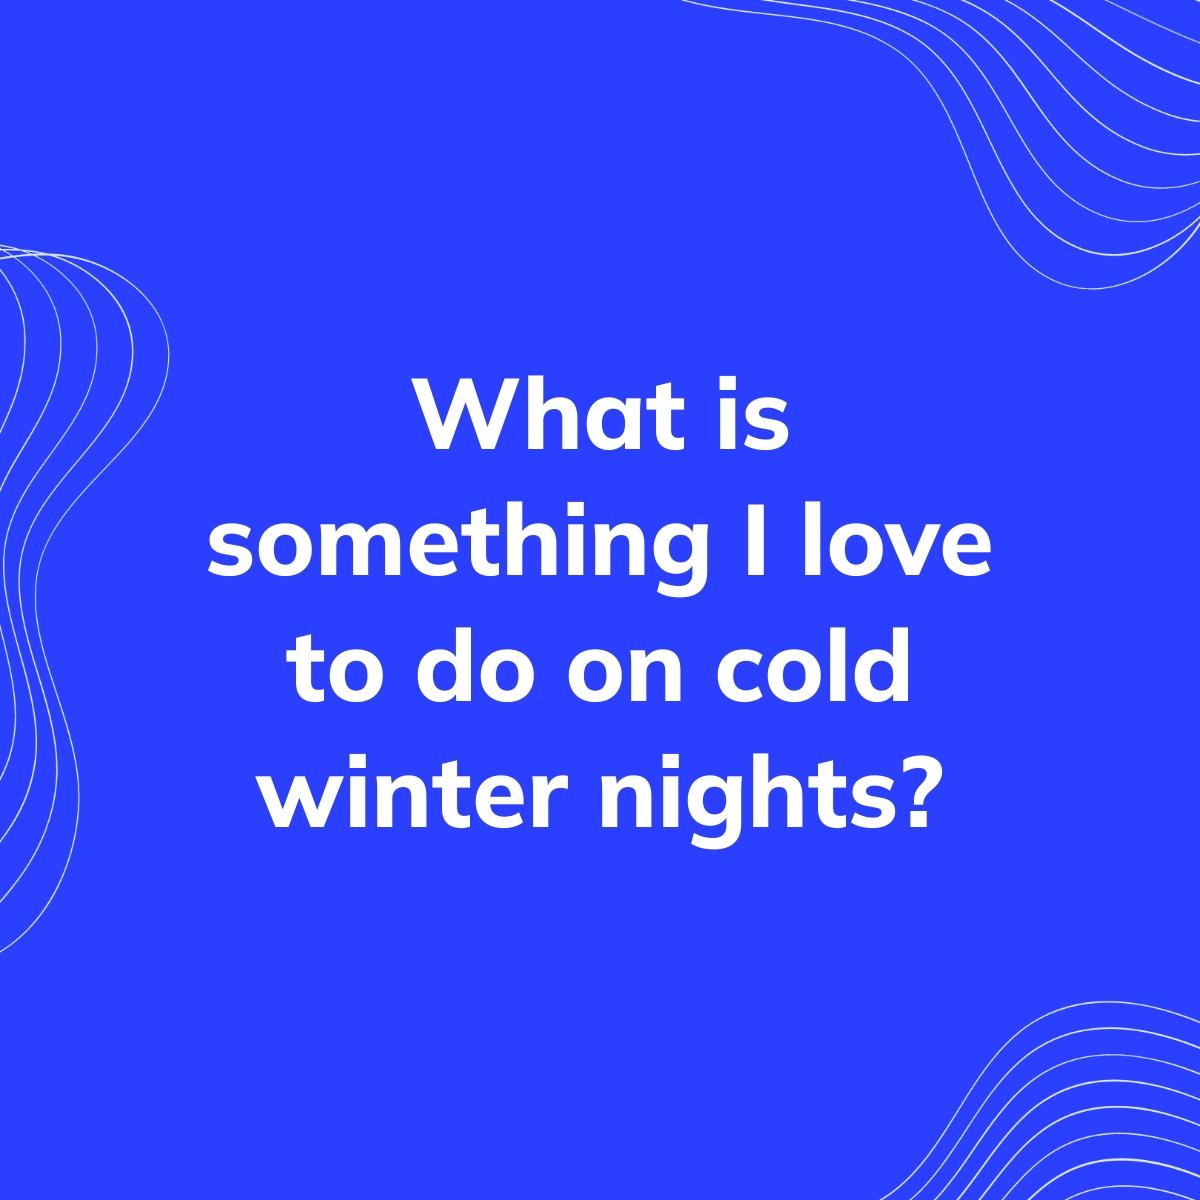 Journal Prompt: What is something I love to do on cold winter nights?